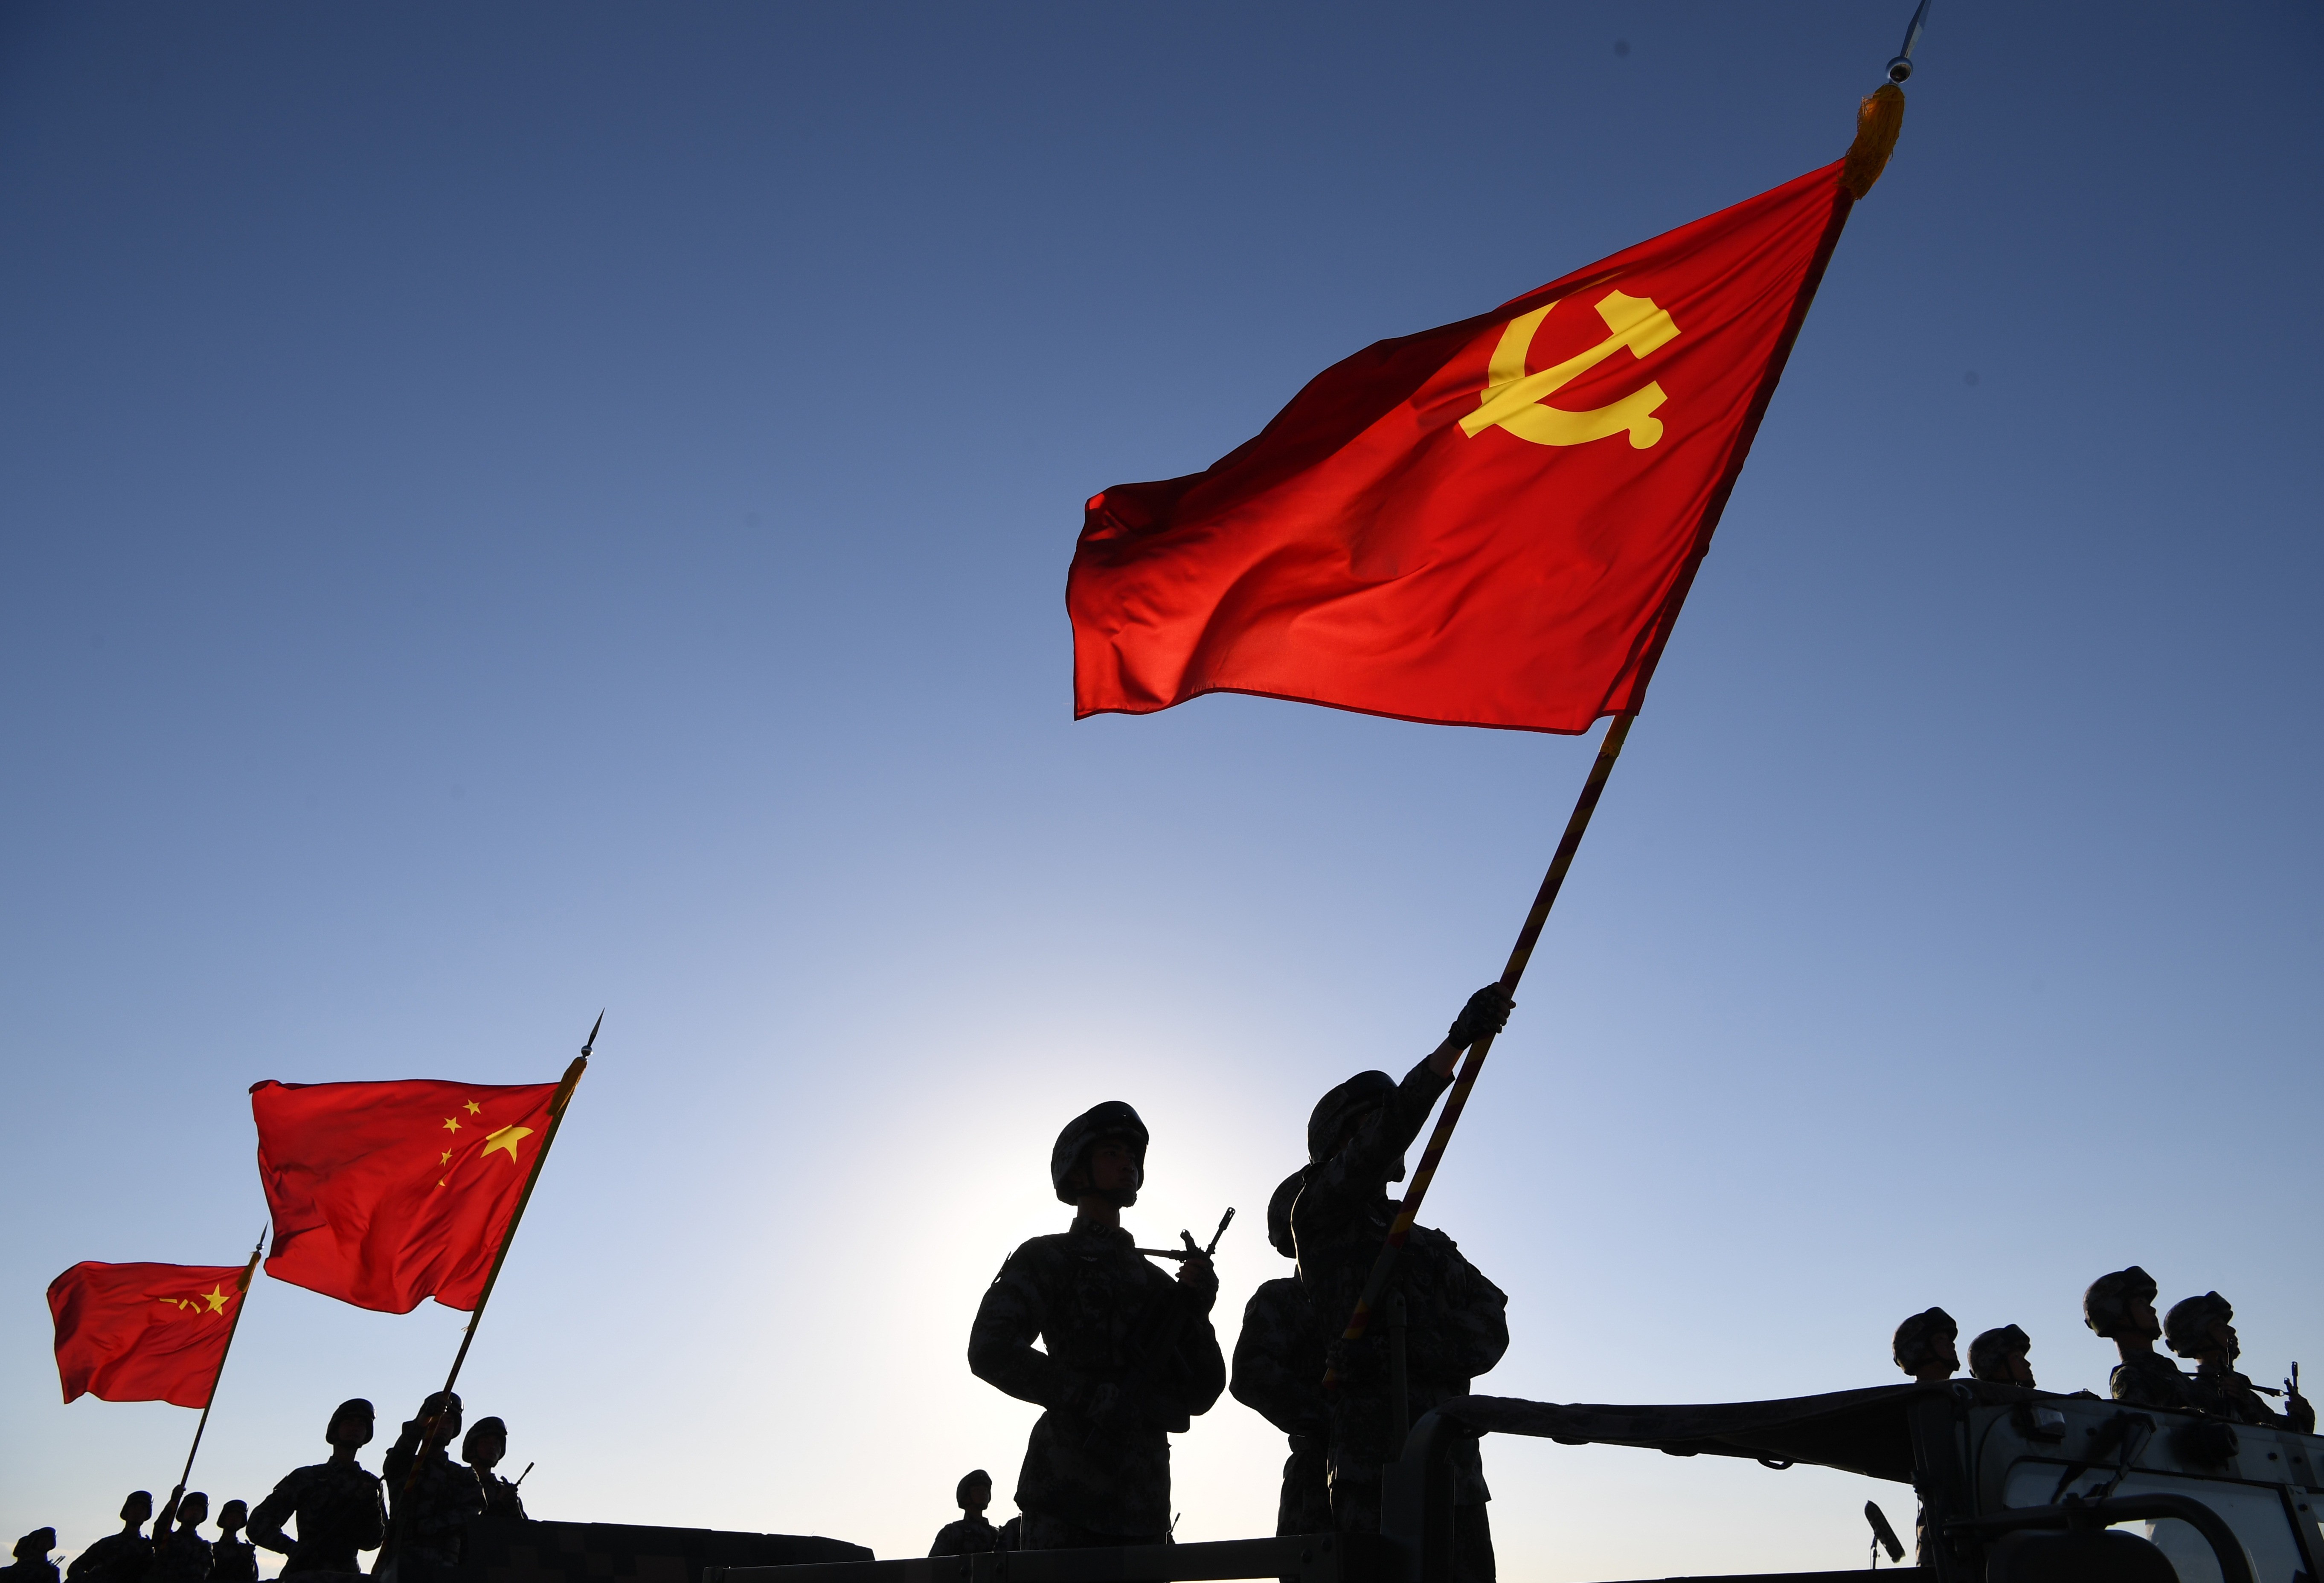 China’s military spending has risen at double-digit rates for most of the last decade and a half. Photo: Xinhua